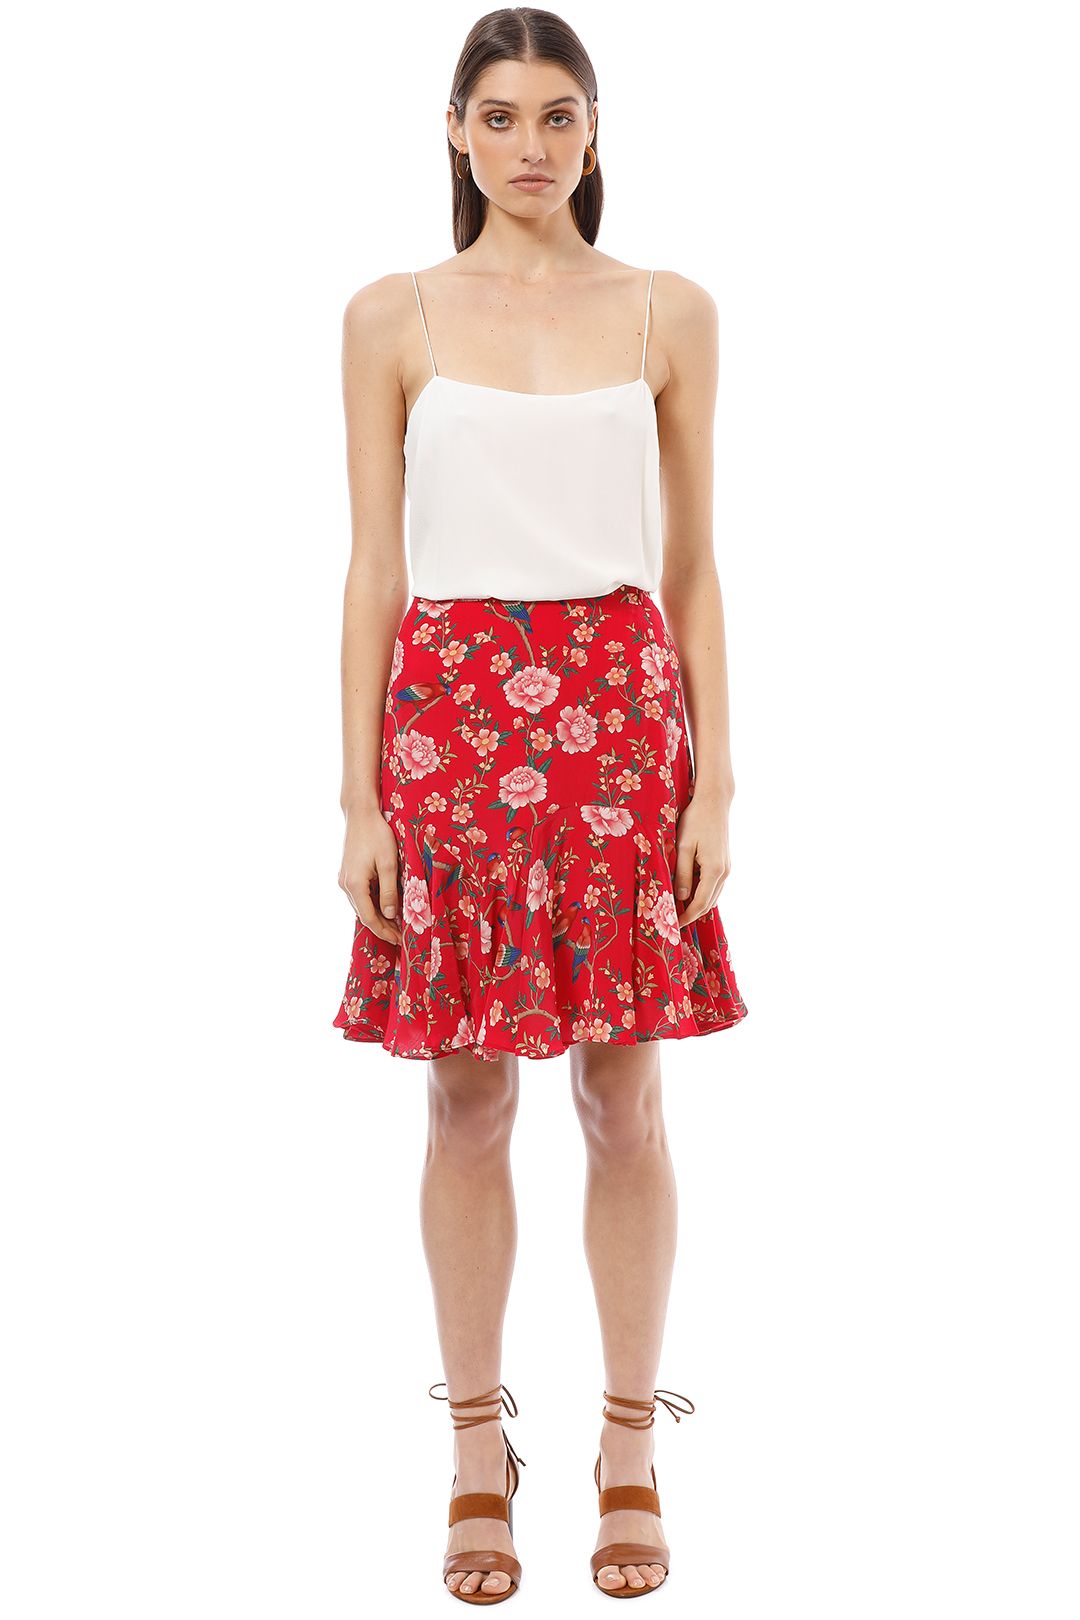 Alannah Hill - Own Wings Skirt - Red - Front